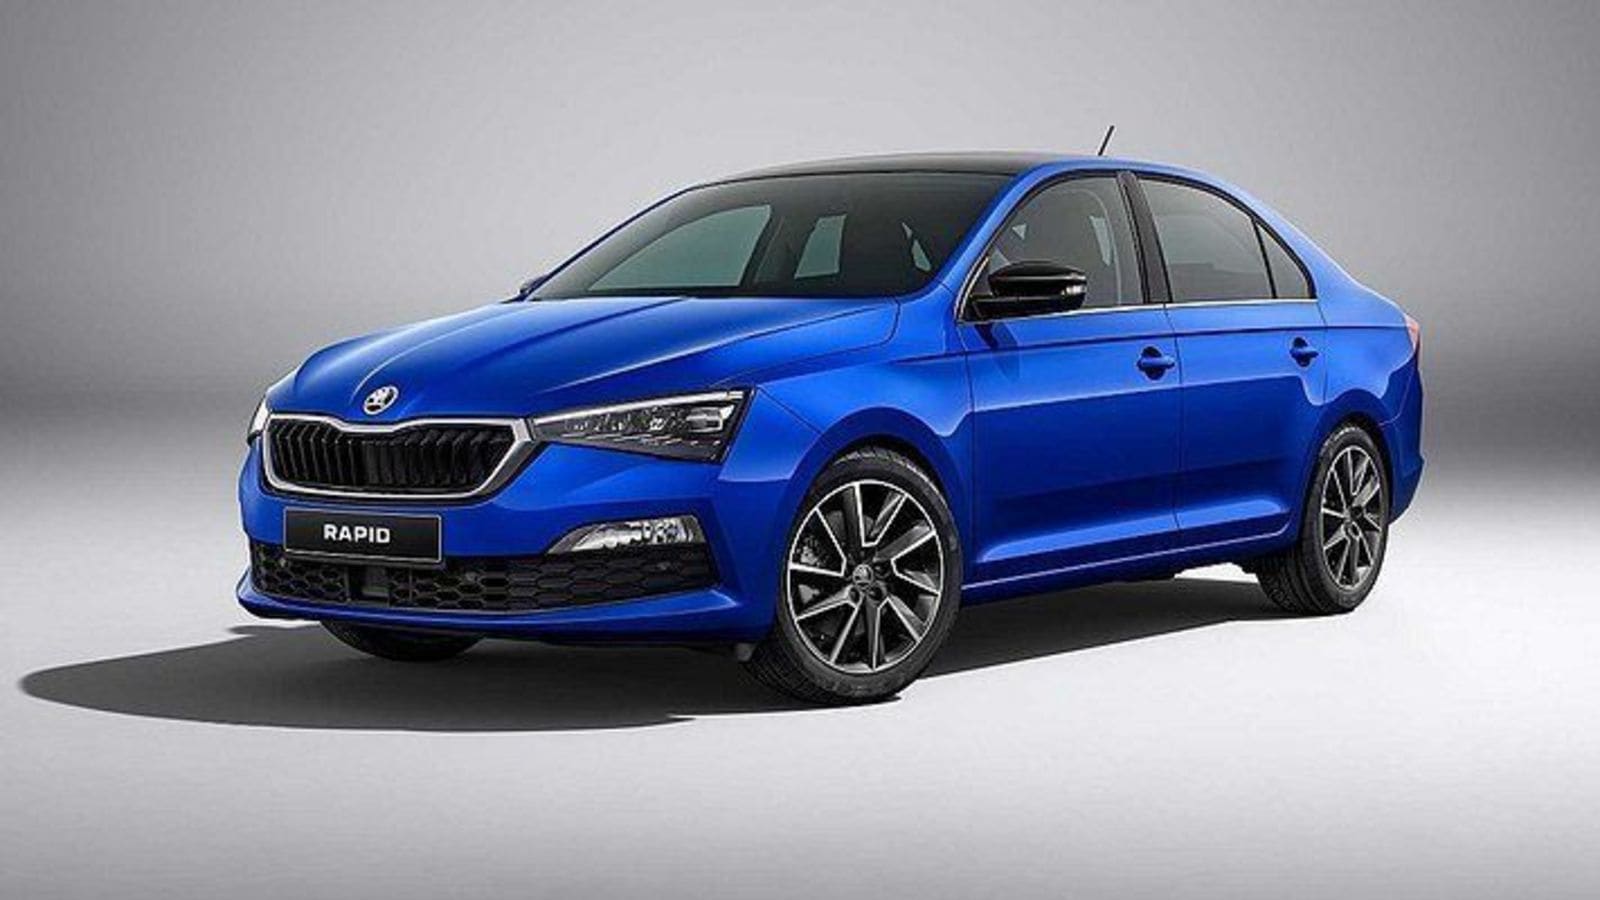 Skoda Rapid 2020 launched in Russia, may hit Indian shores soon